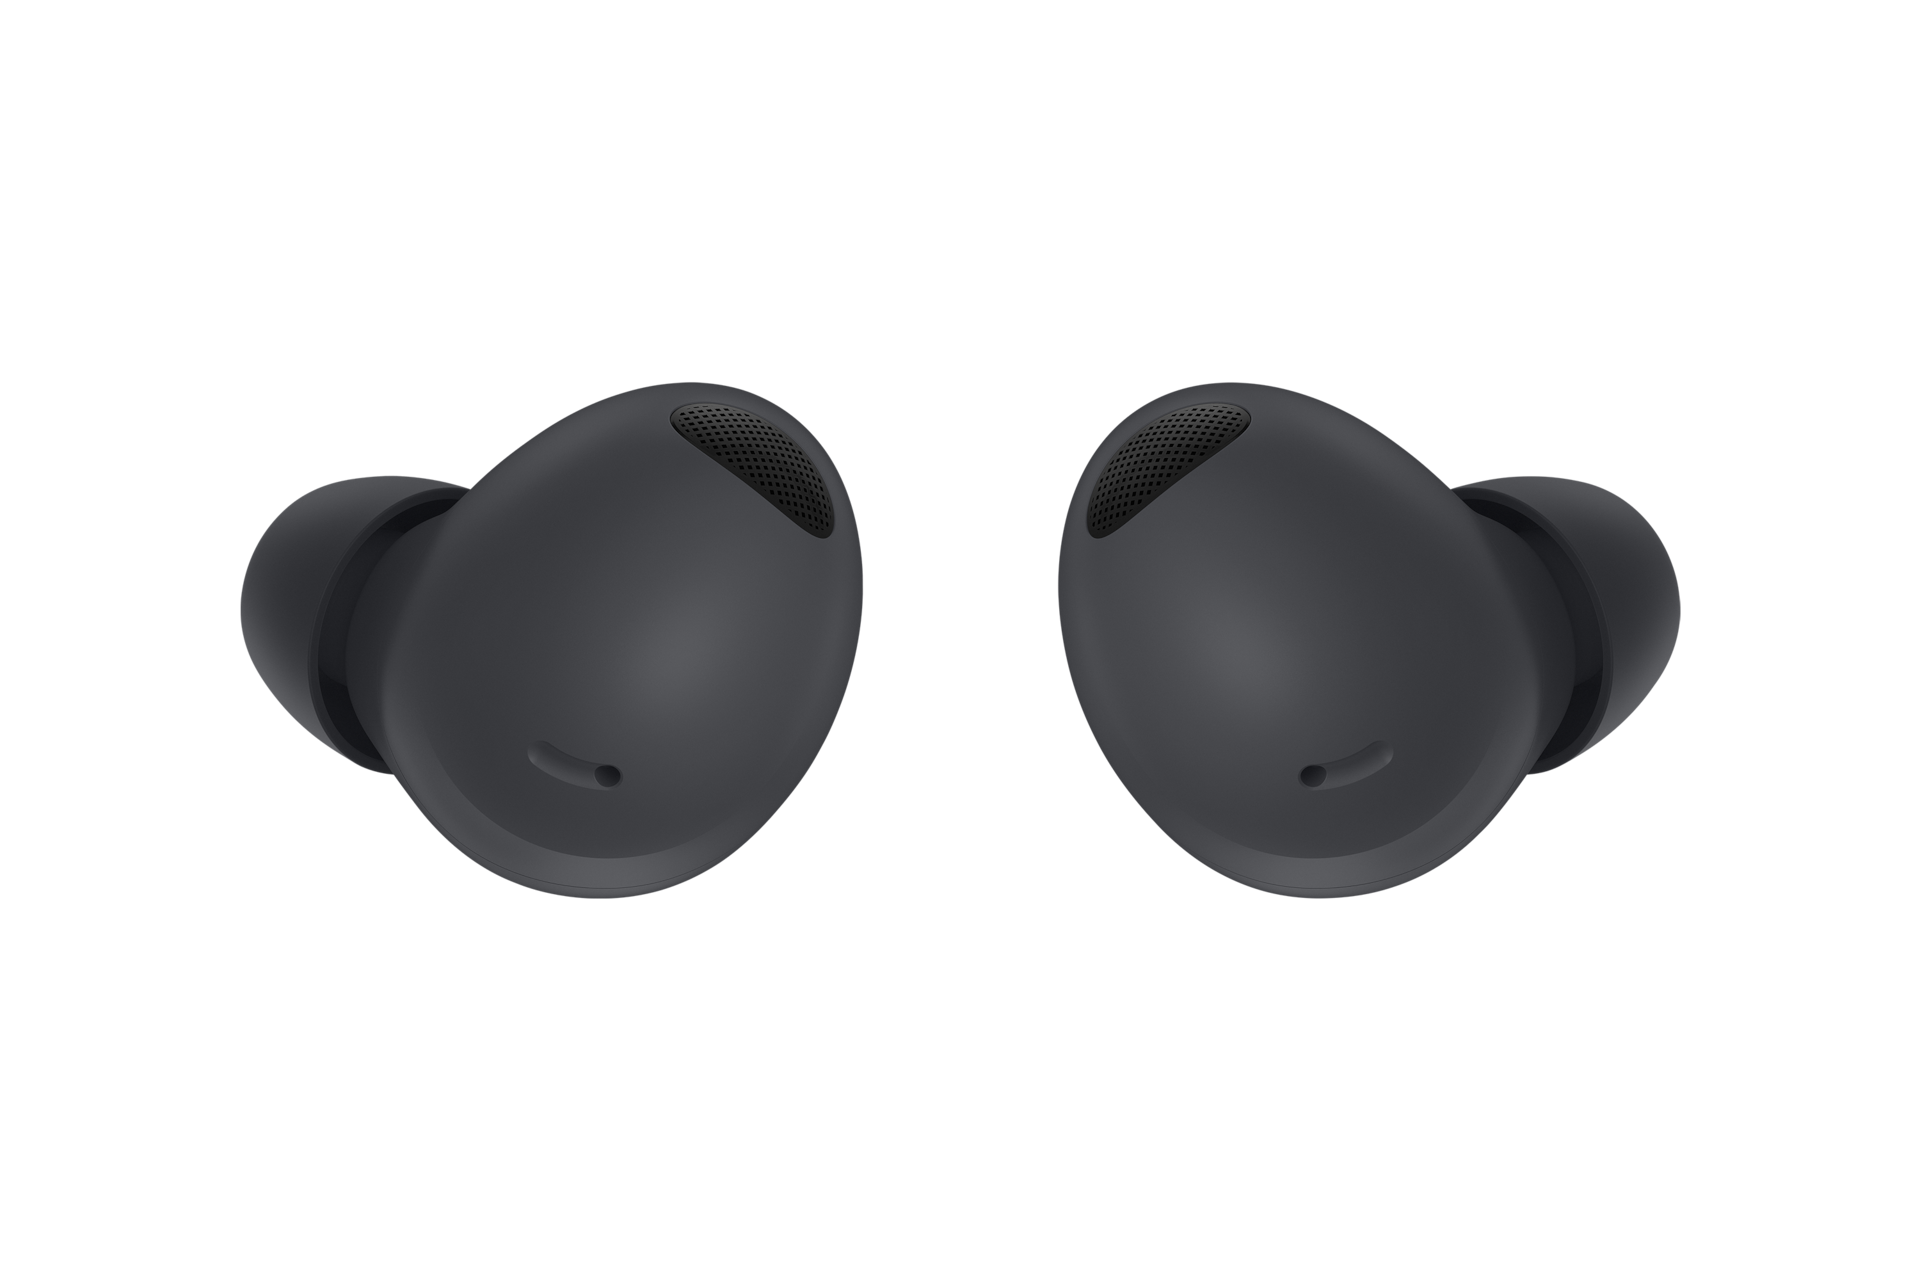 View the Galaxy Buds 2 Pro reviews, specs, features, release dates, and price. Experience 24bit Hi-Fi sound for quality listening. Front perspective of Galaxy Buds2 Pro in Graphite.